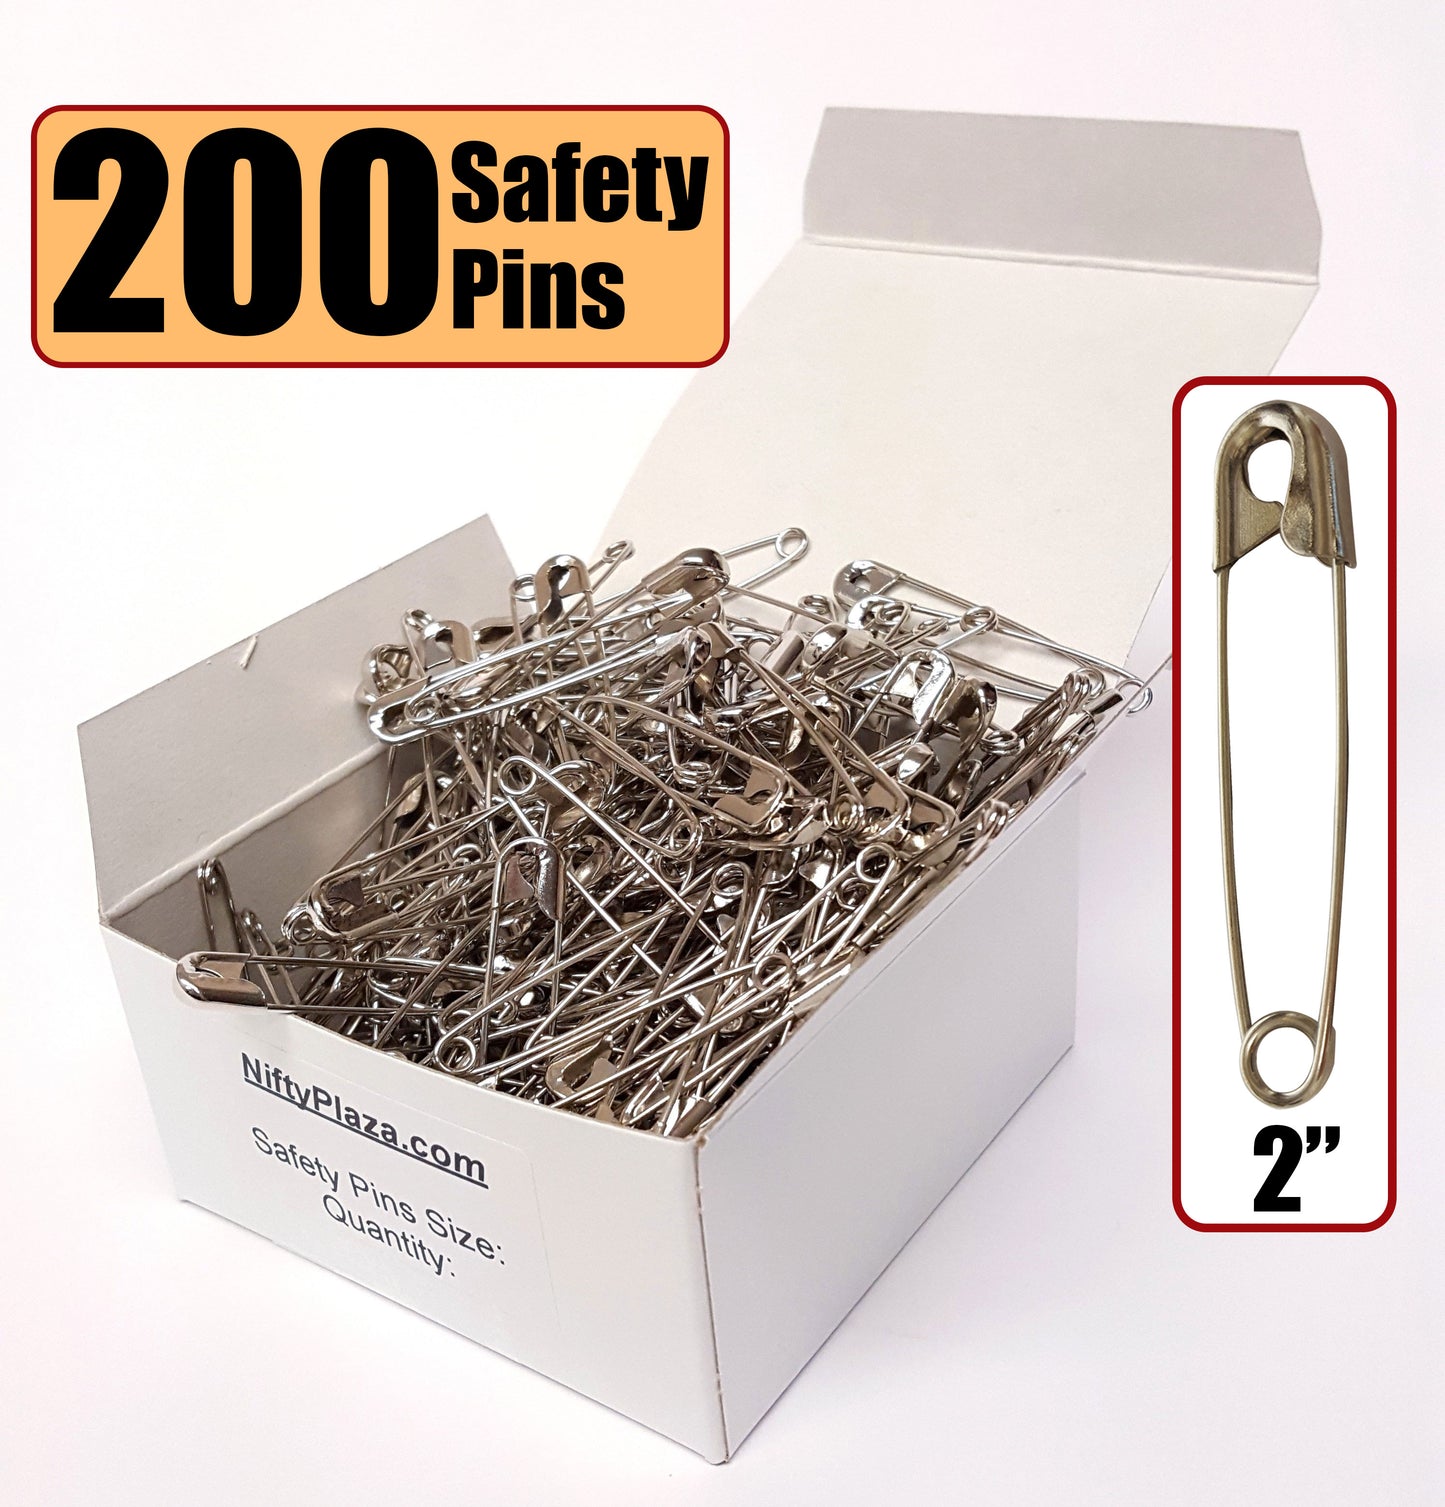 NiftyPlaza Extra Large Safety Pins, Size 2 Inch, 200 Safety Pins, Heavy Duty for Sewing, Crafting